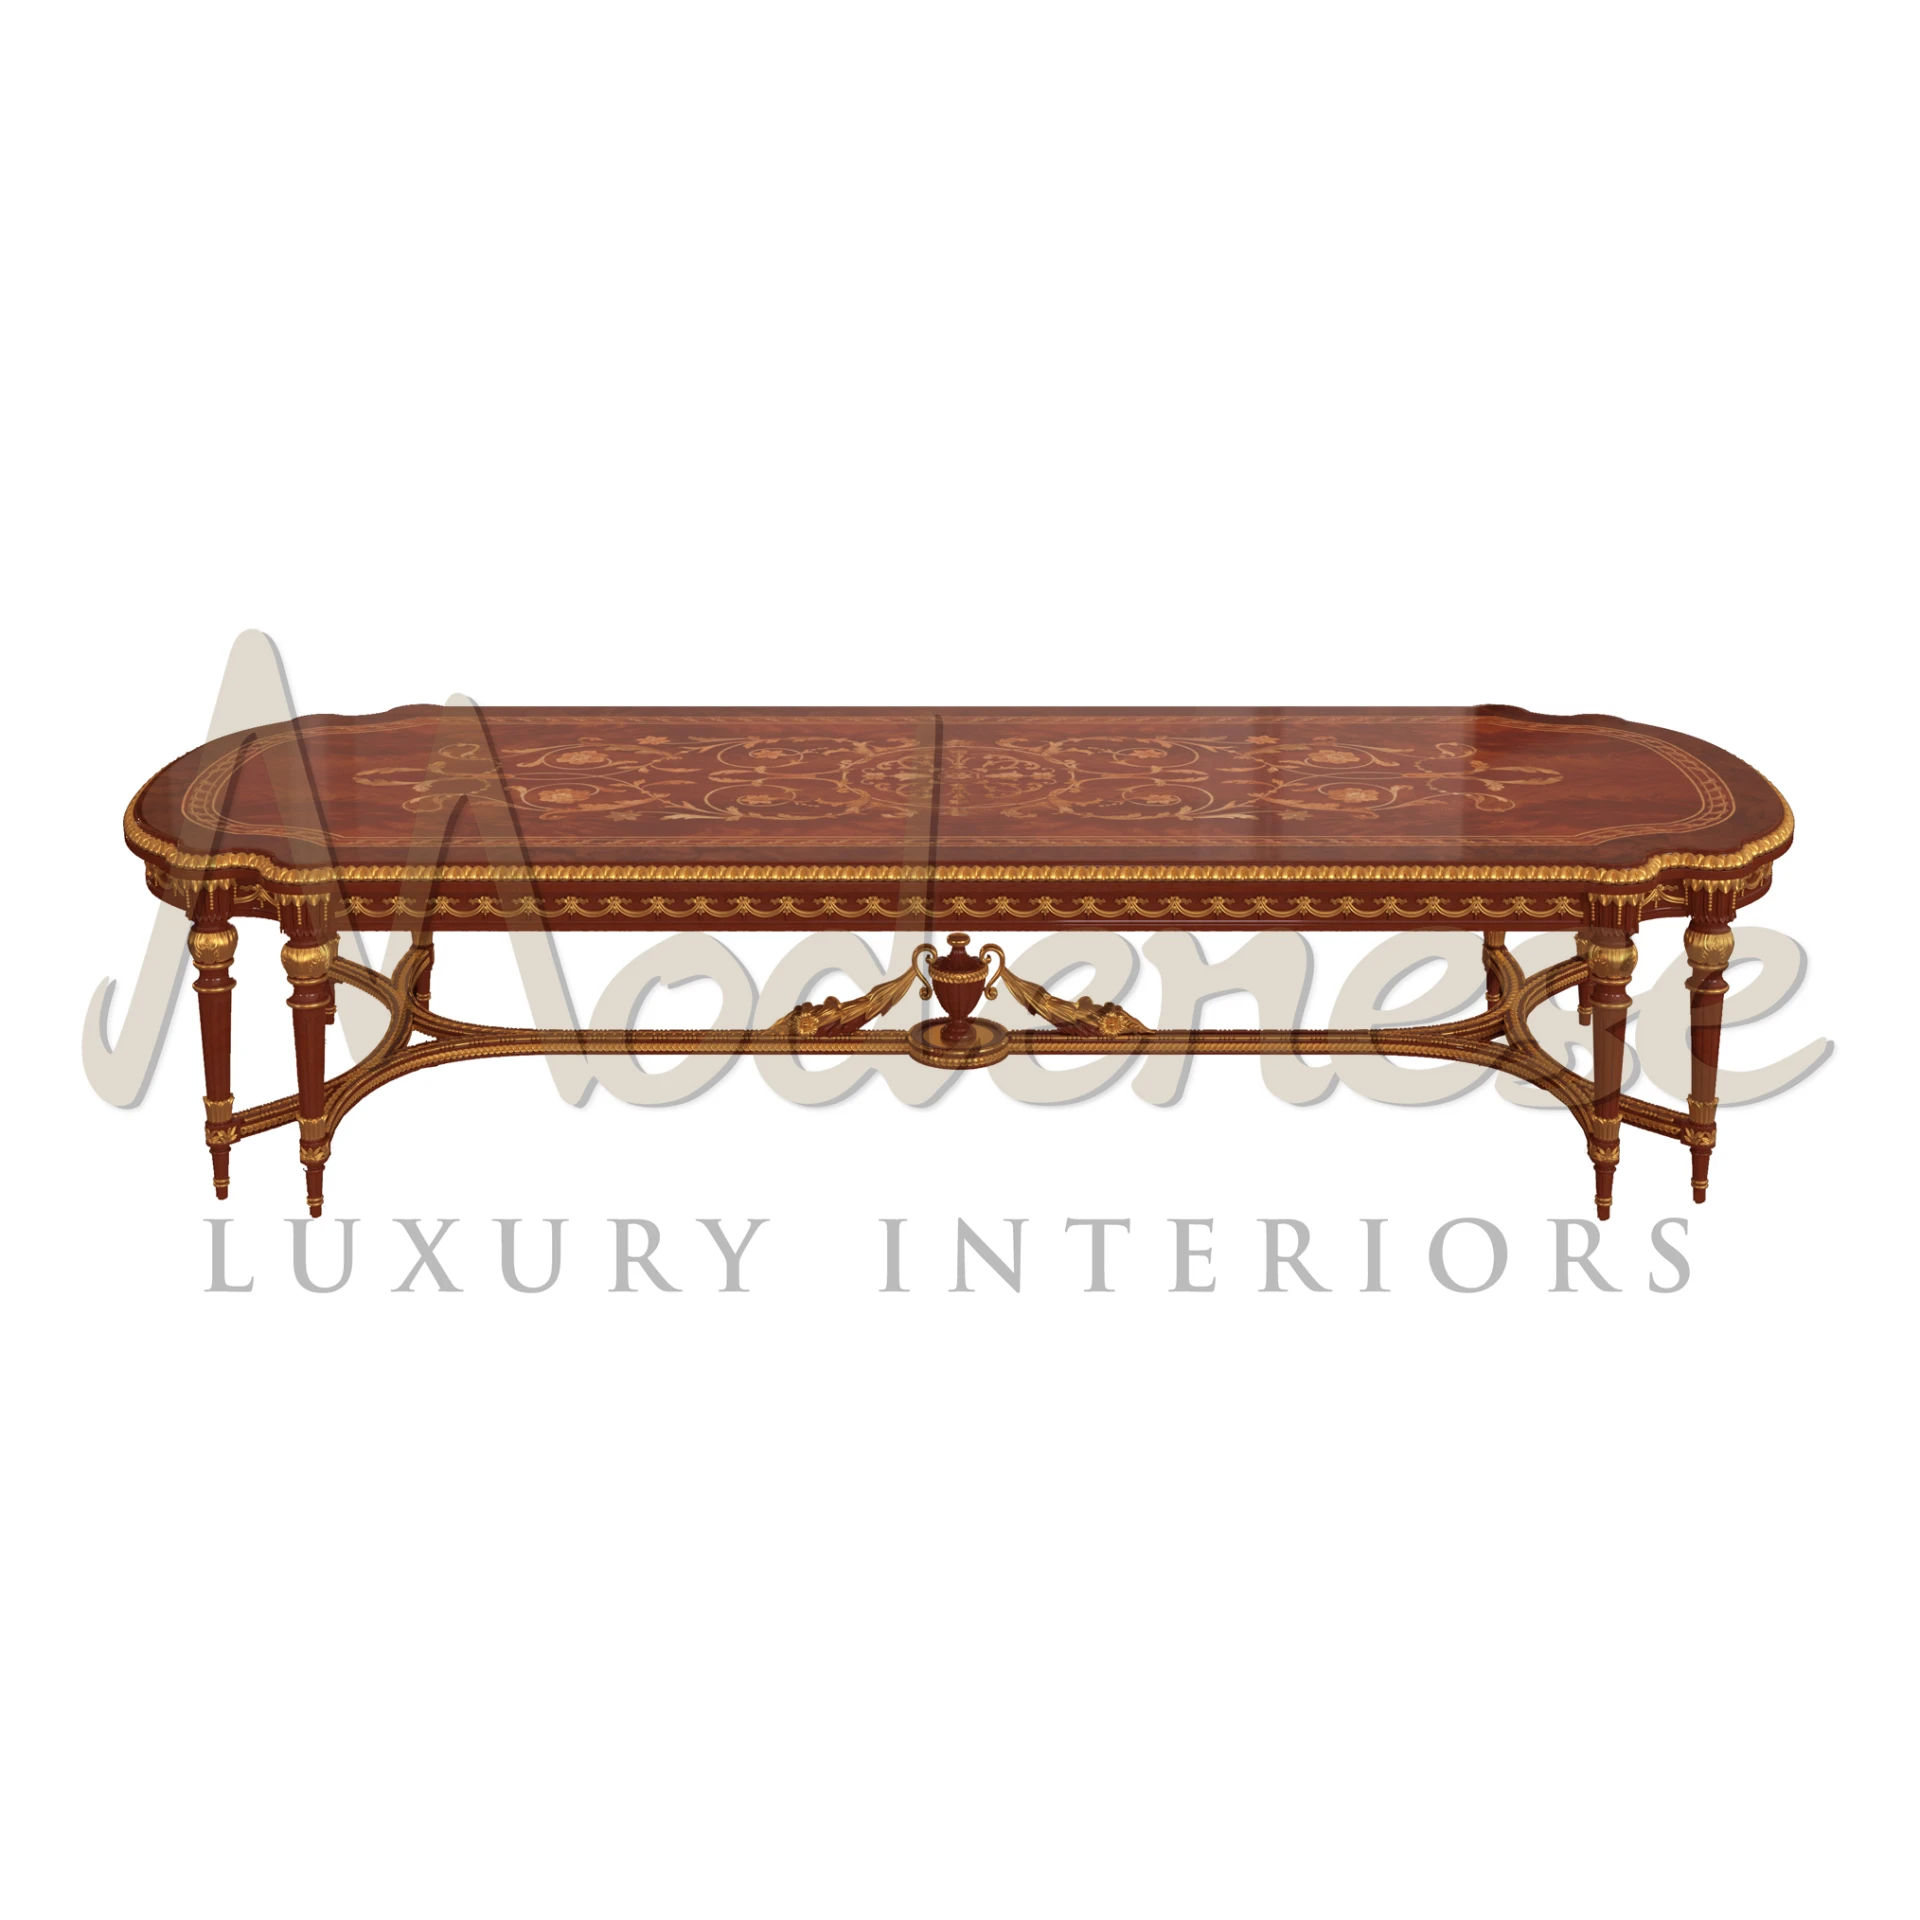 Classic design, intricate inlays, seats 10. Ornate golden motifs add excellence to your living room. 